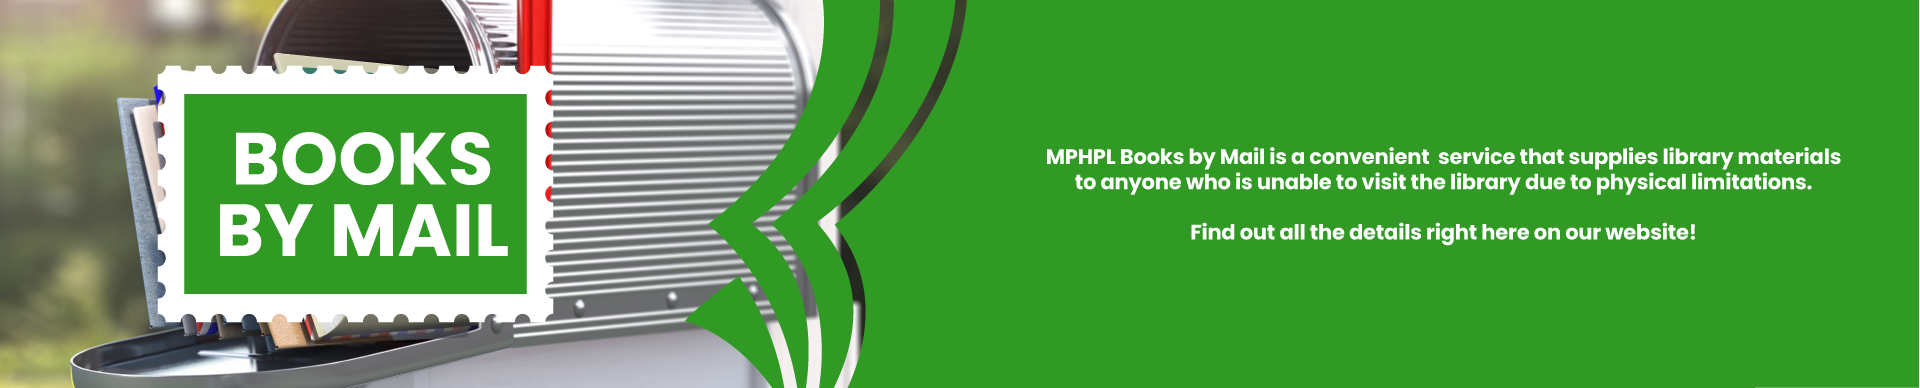 MPHPL Books by Mail is a convenient    service that supplies library materials to   anyone who is unable to visit the   library due to physical limitations.    Find out all the details right here on our website! 